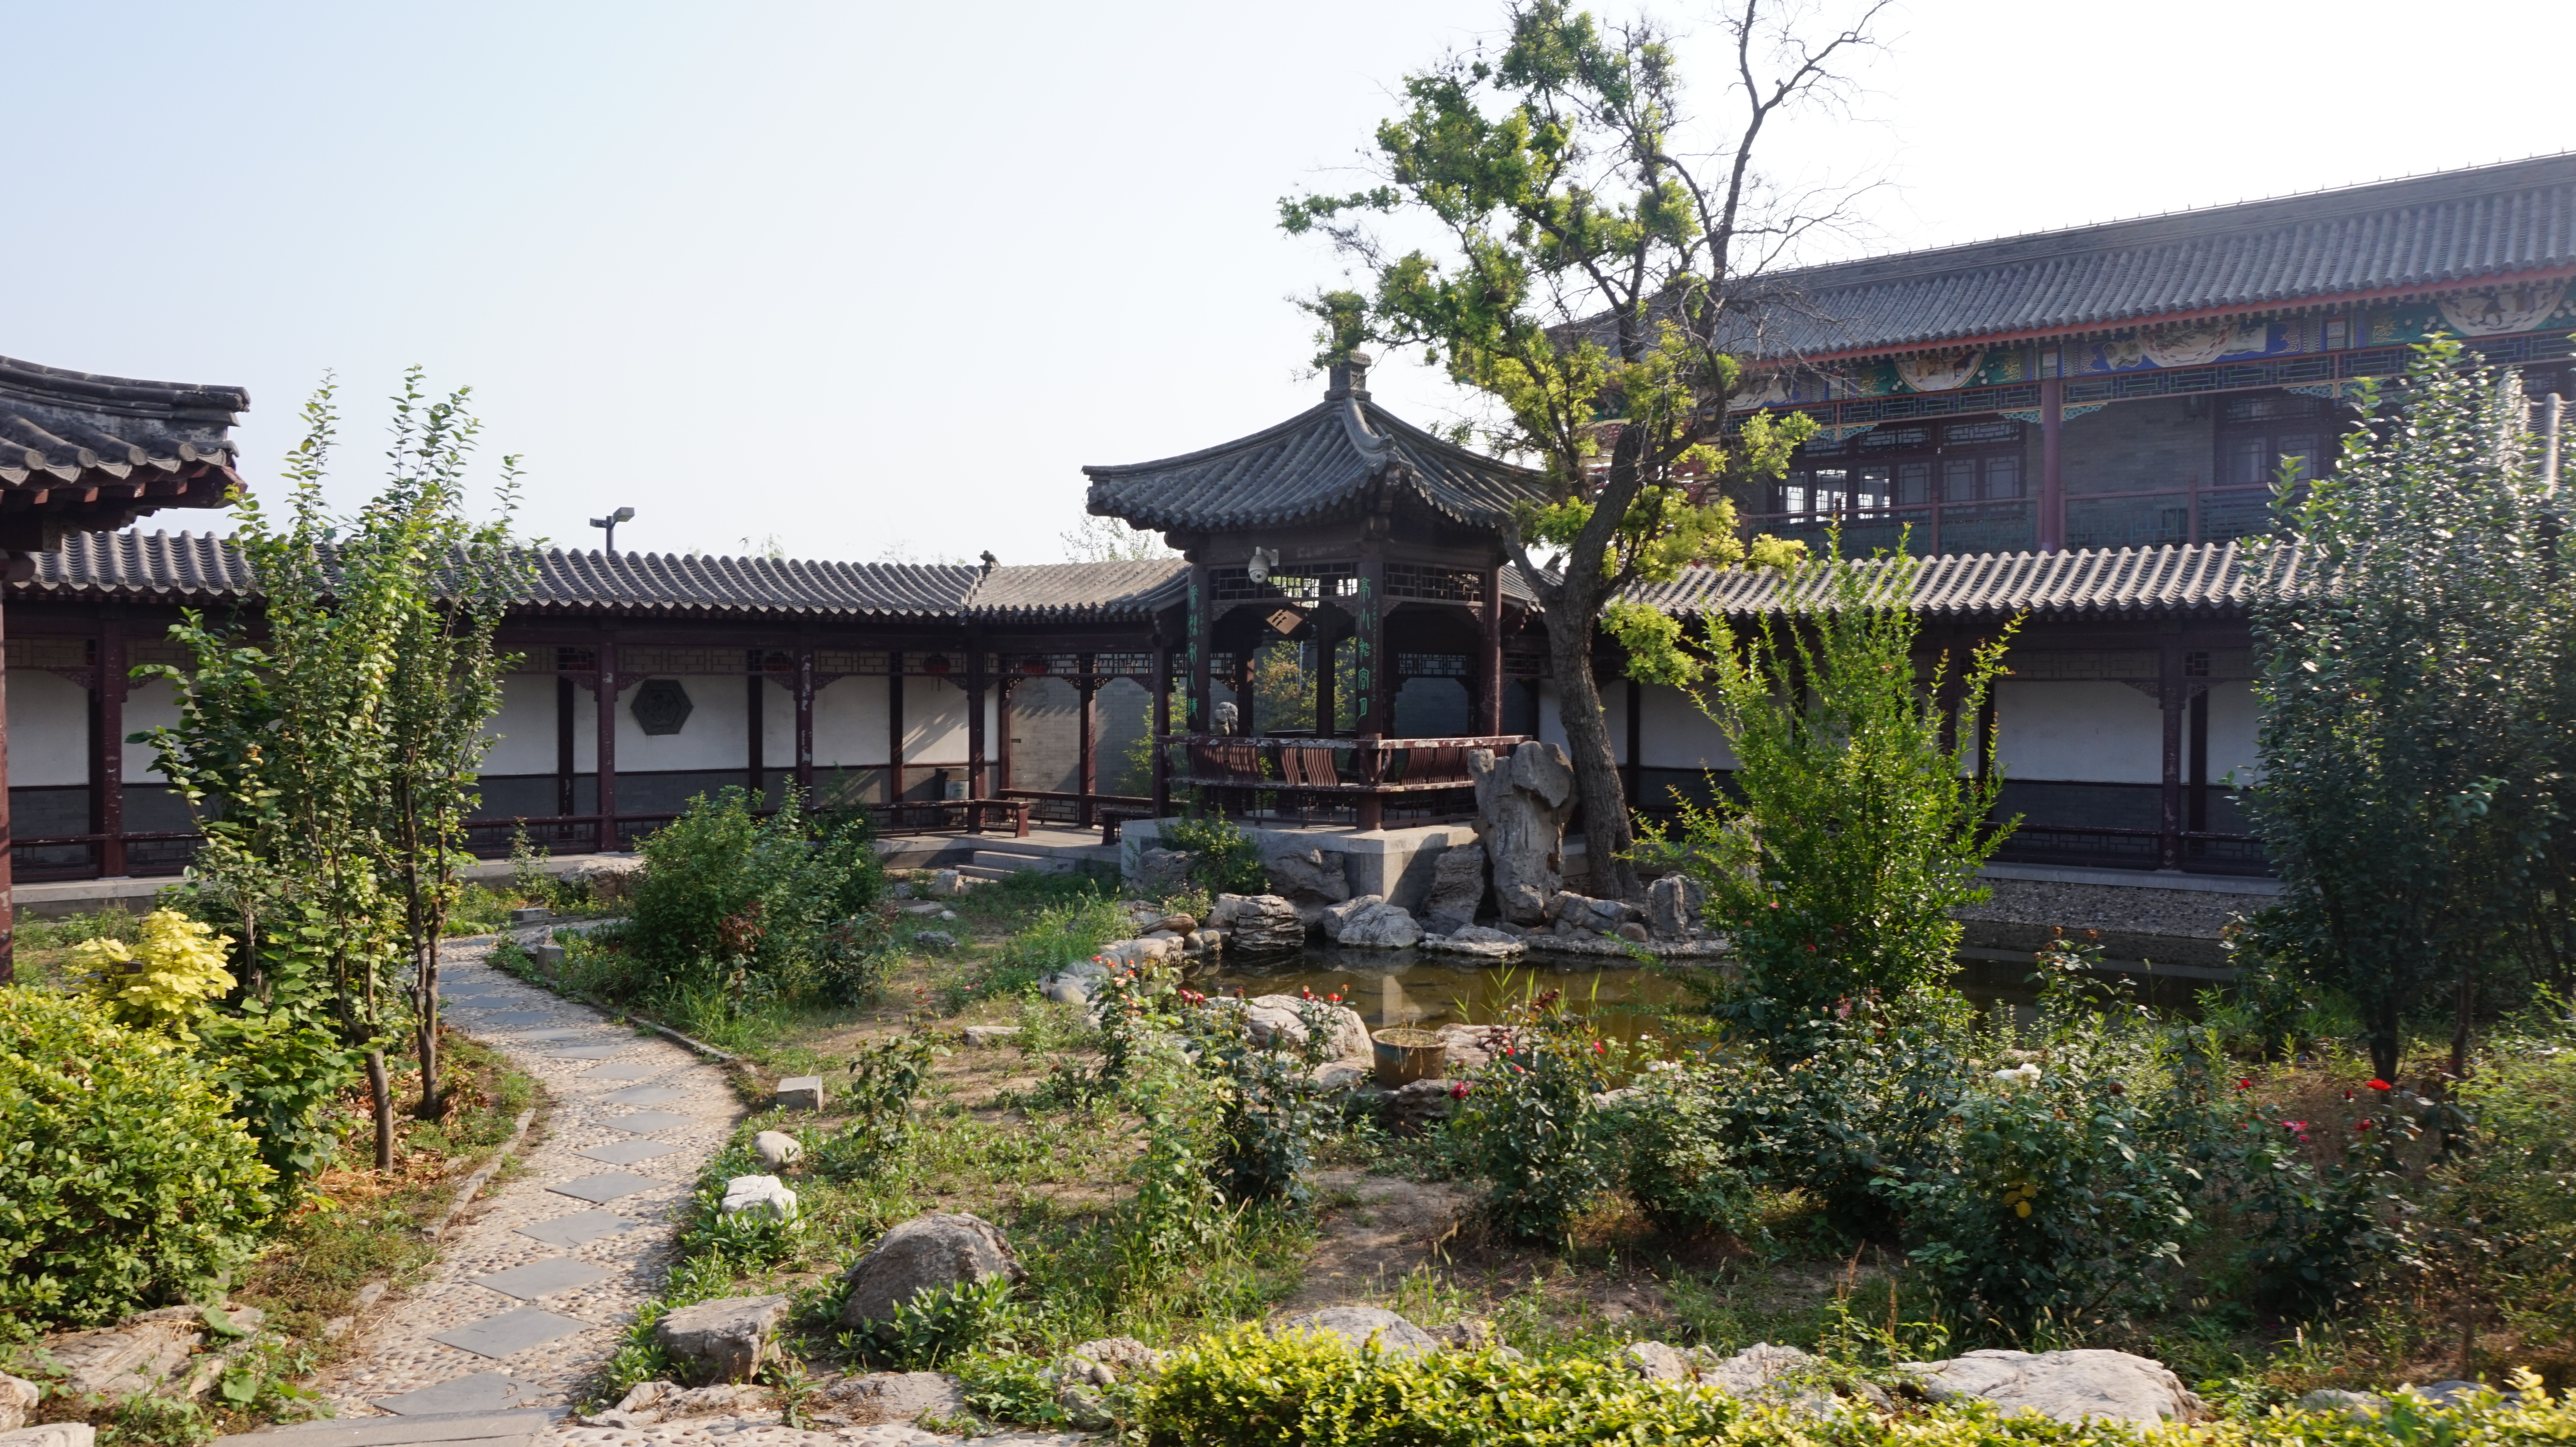 Chinese Style Architecture in Tianjin